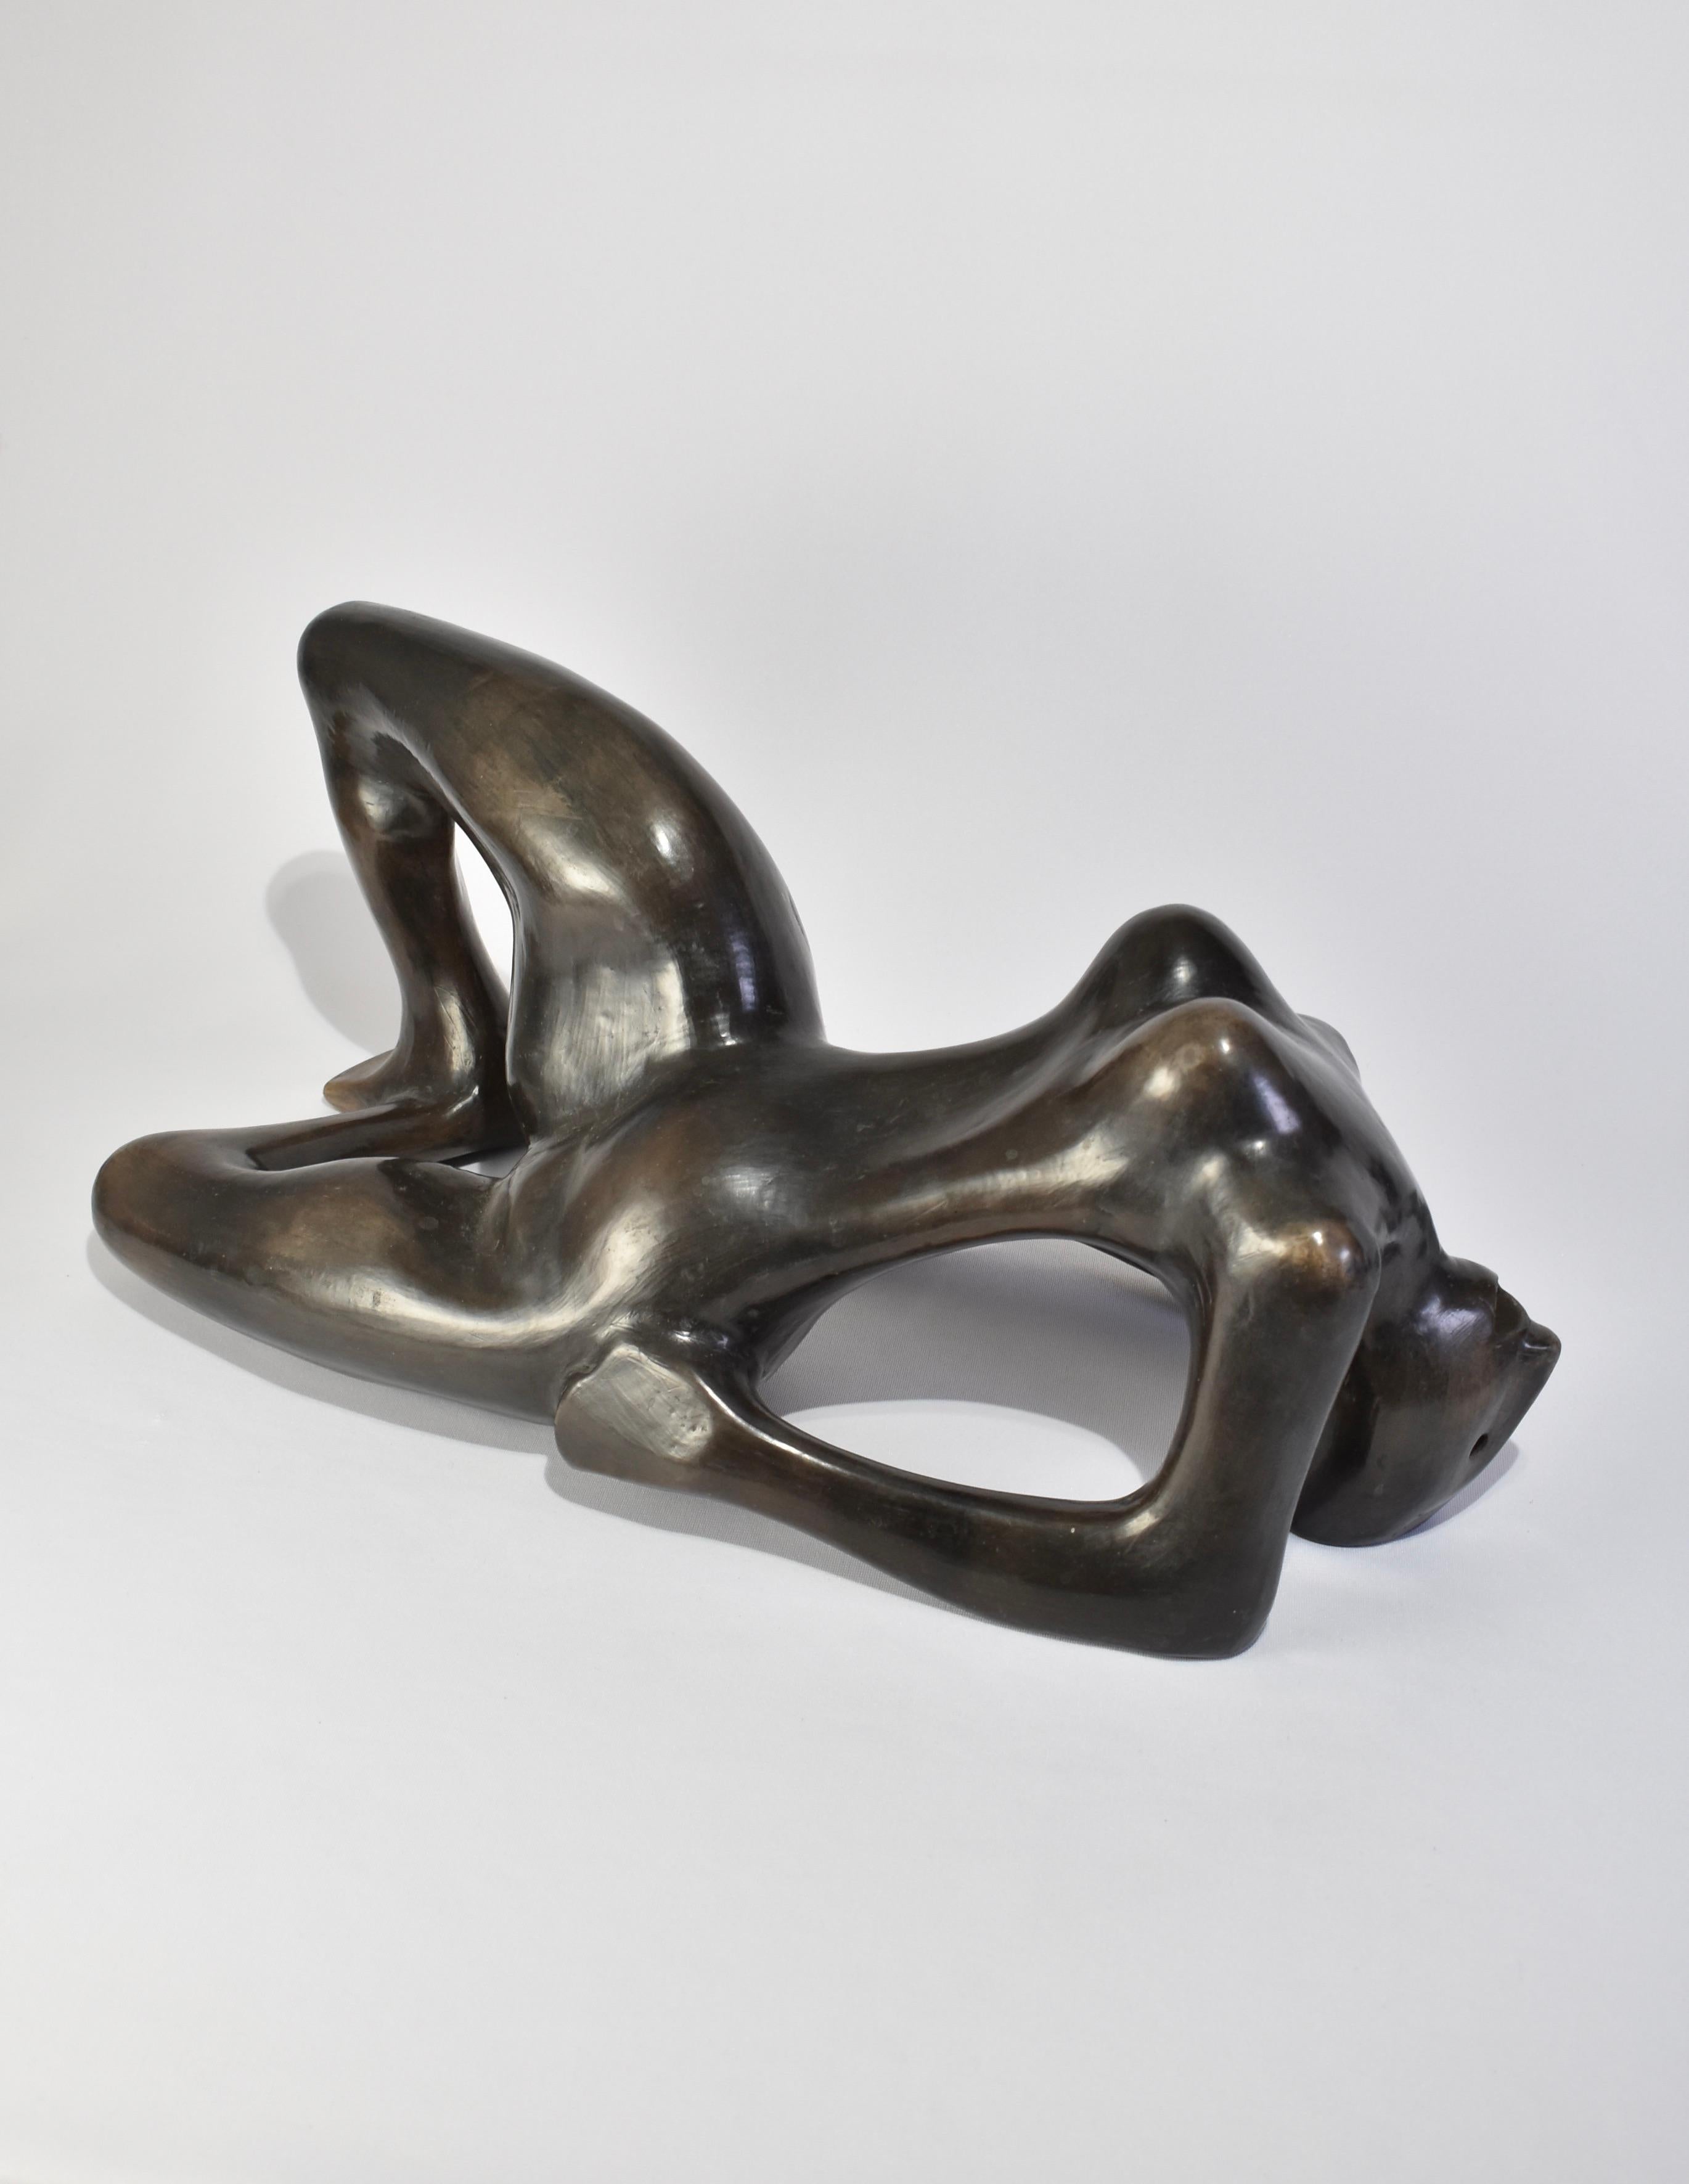 Stunning, black molded ceramic reclining figure sculpture in the style of Henry Moore, ca. 1960s. Illegibly signed on one foot.